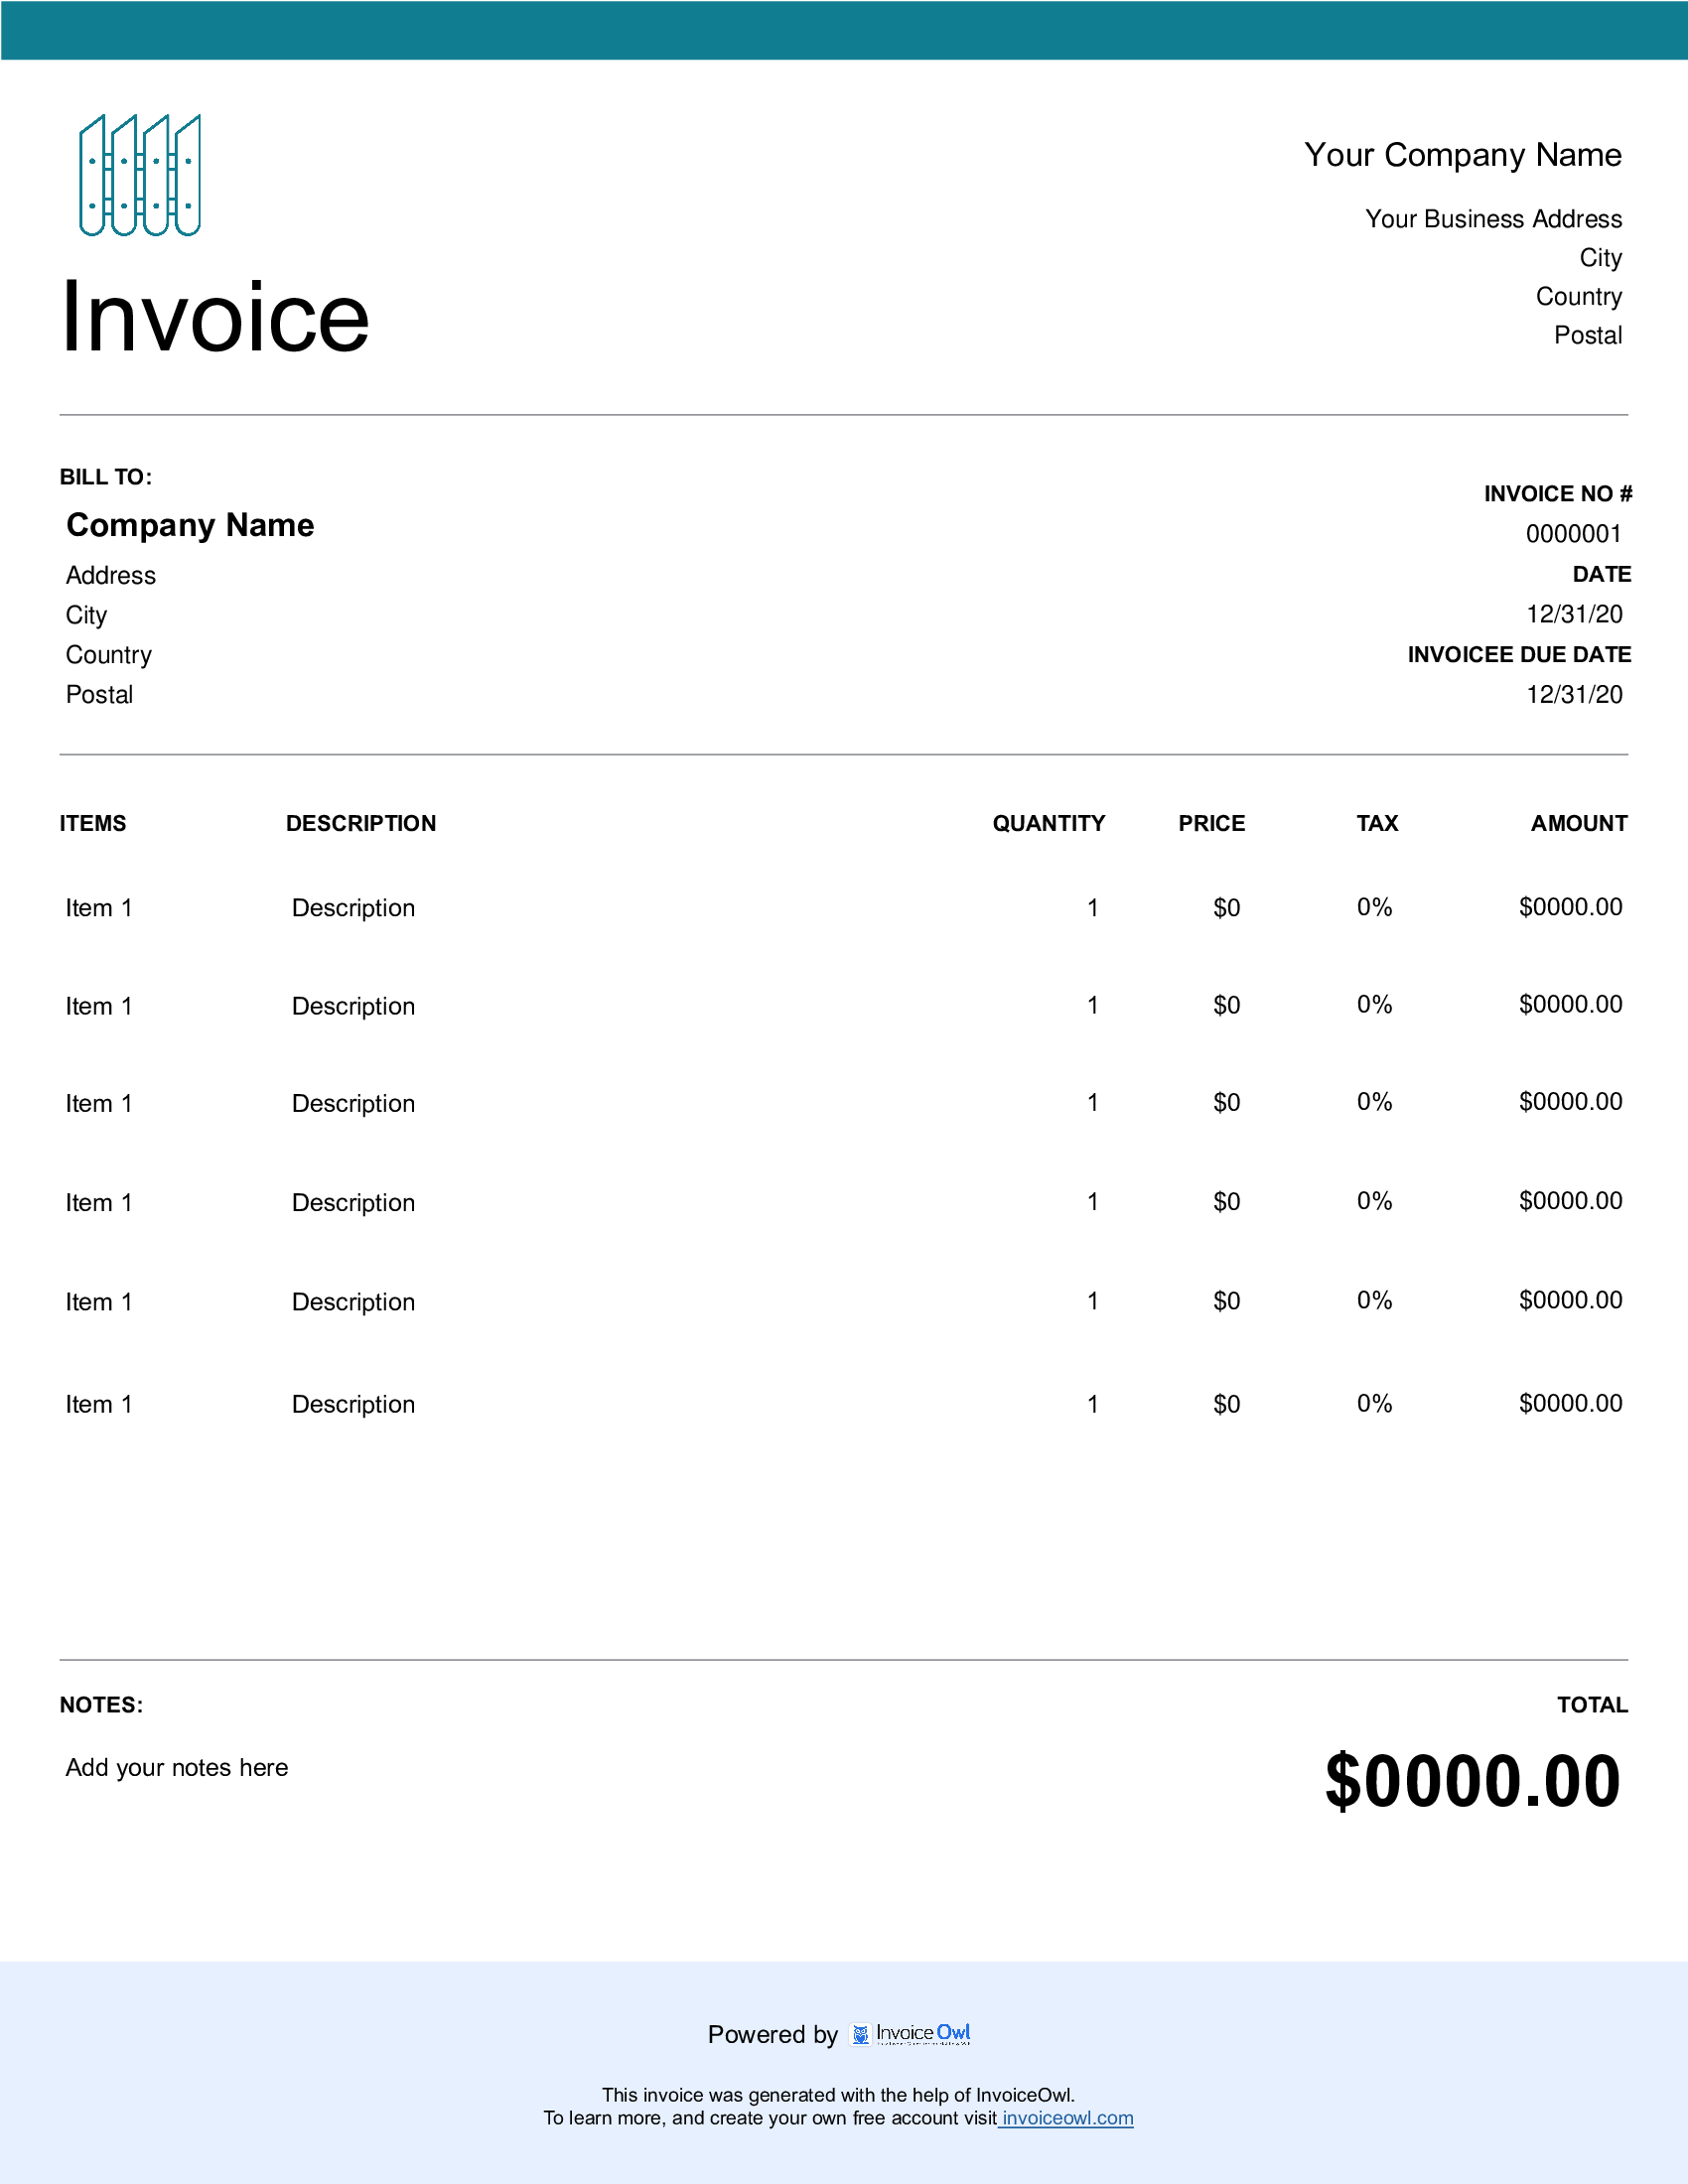 Wire fencing business invoice template